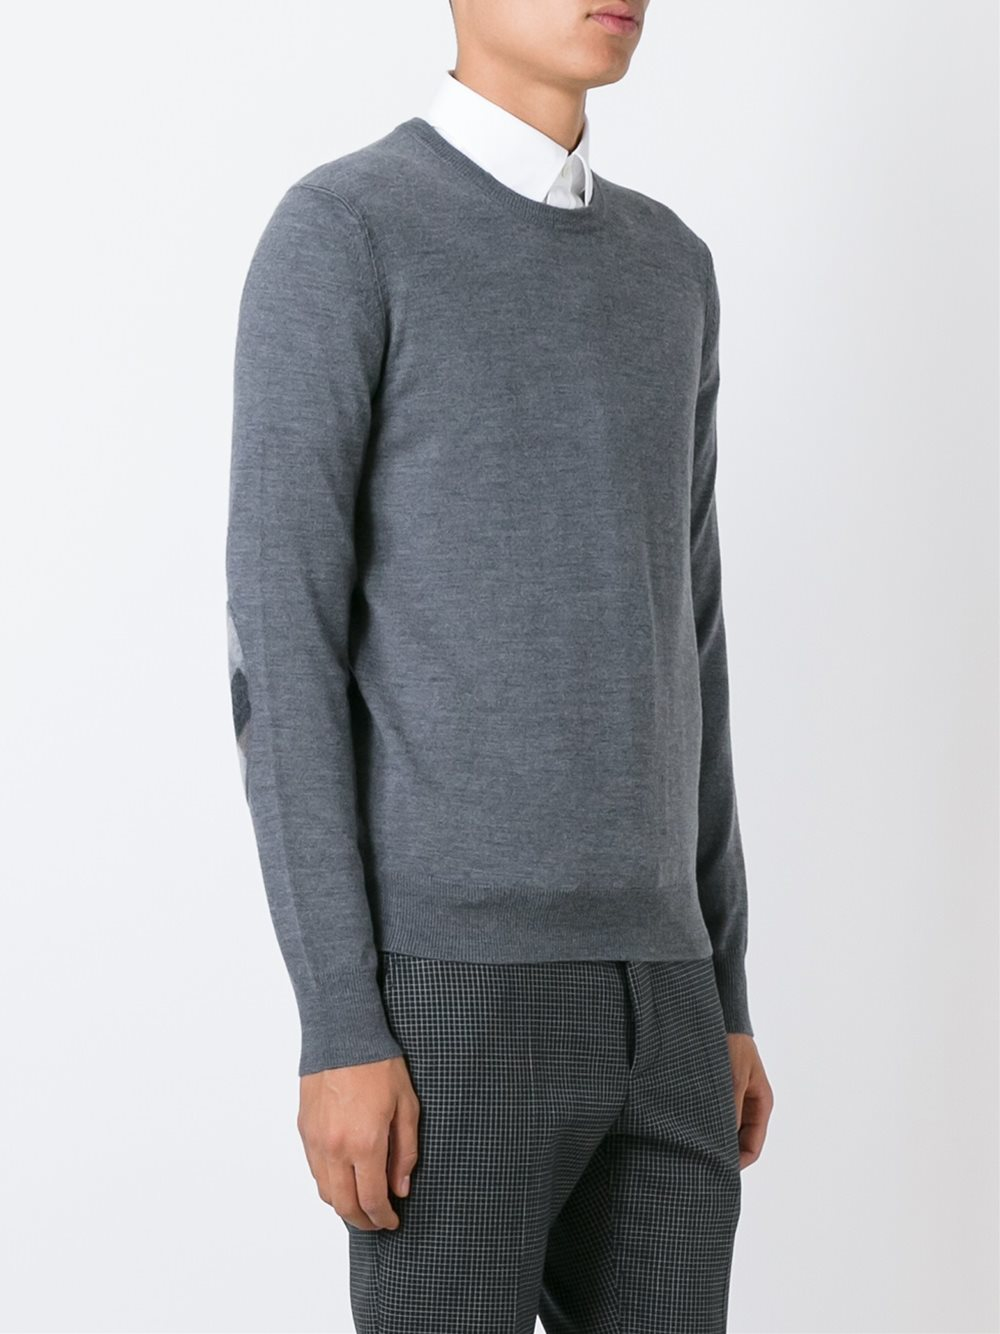 Burberry Wool Crew Neck Pullover in Grey (Gray) for Men - Lyst